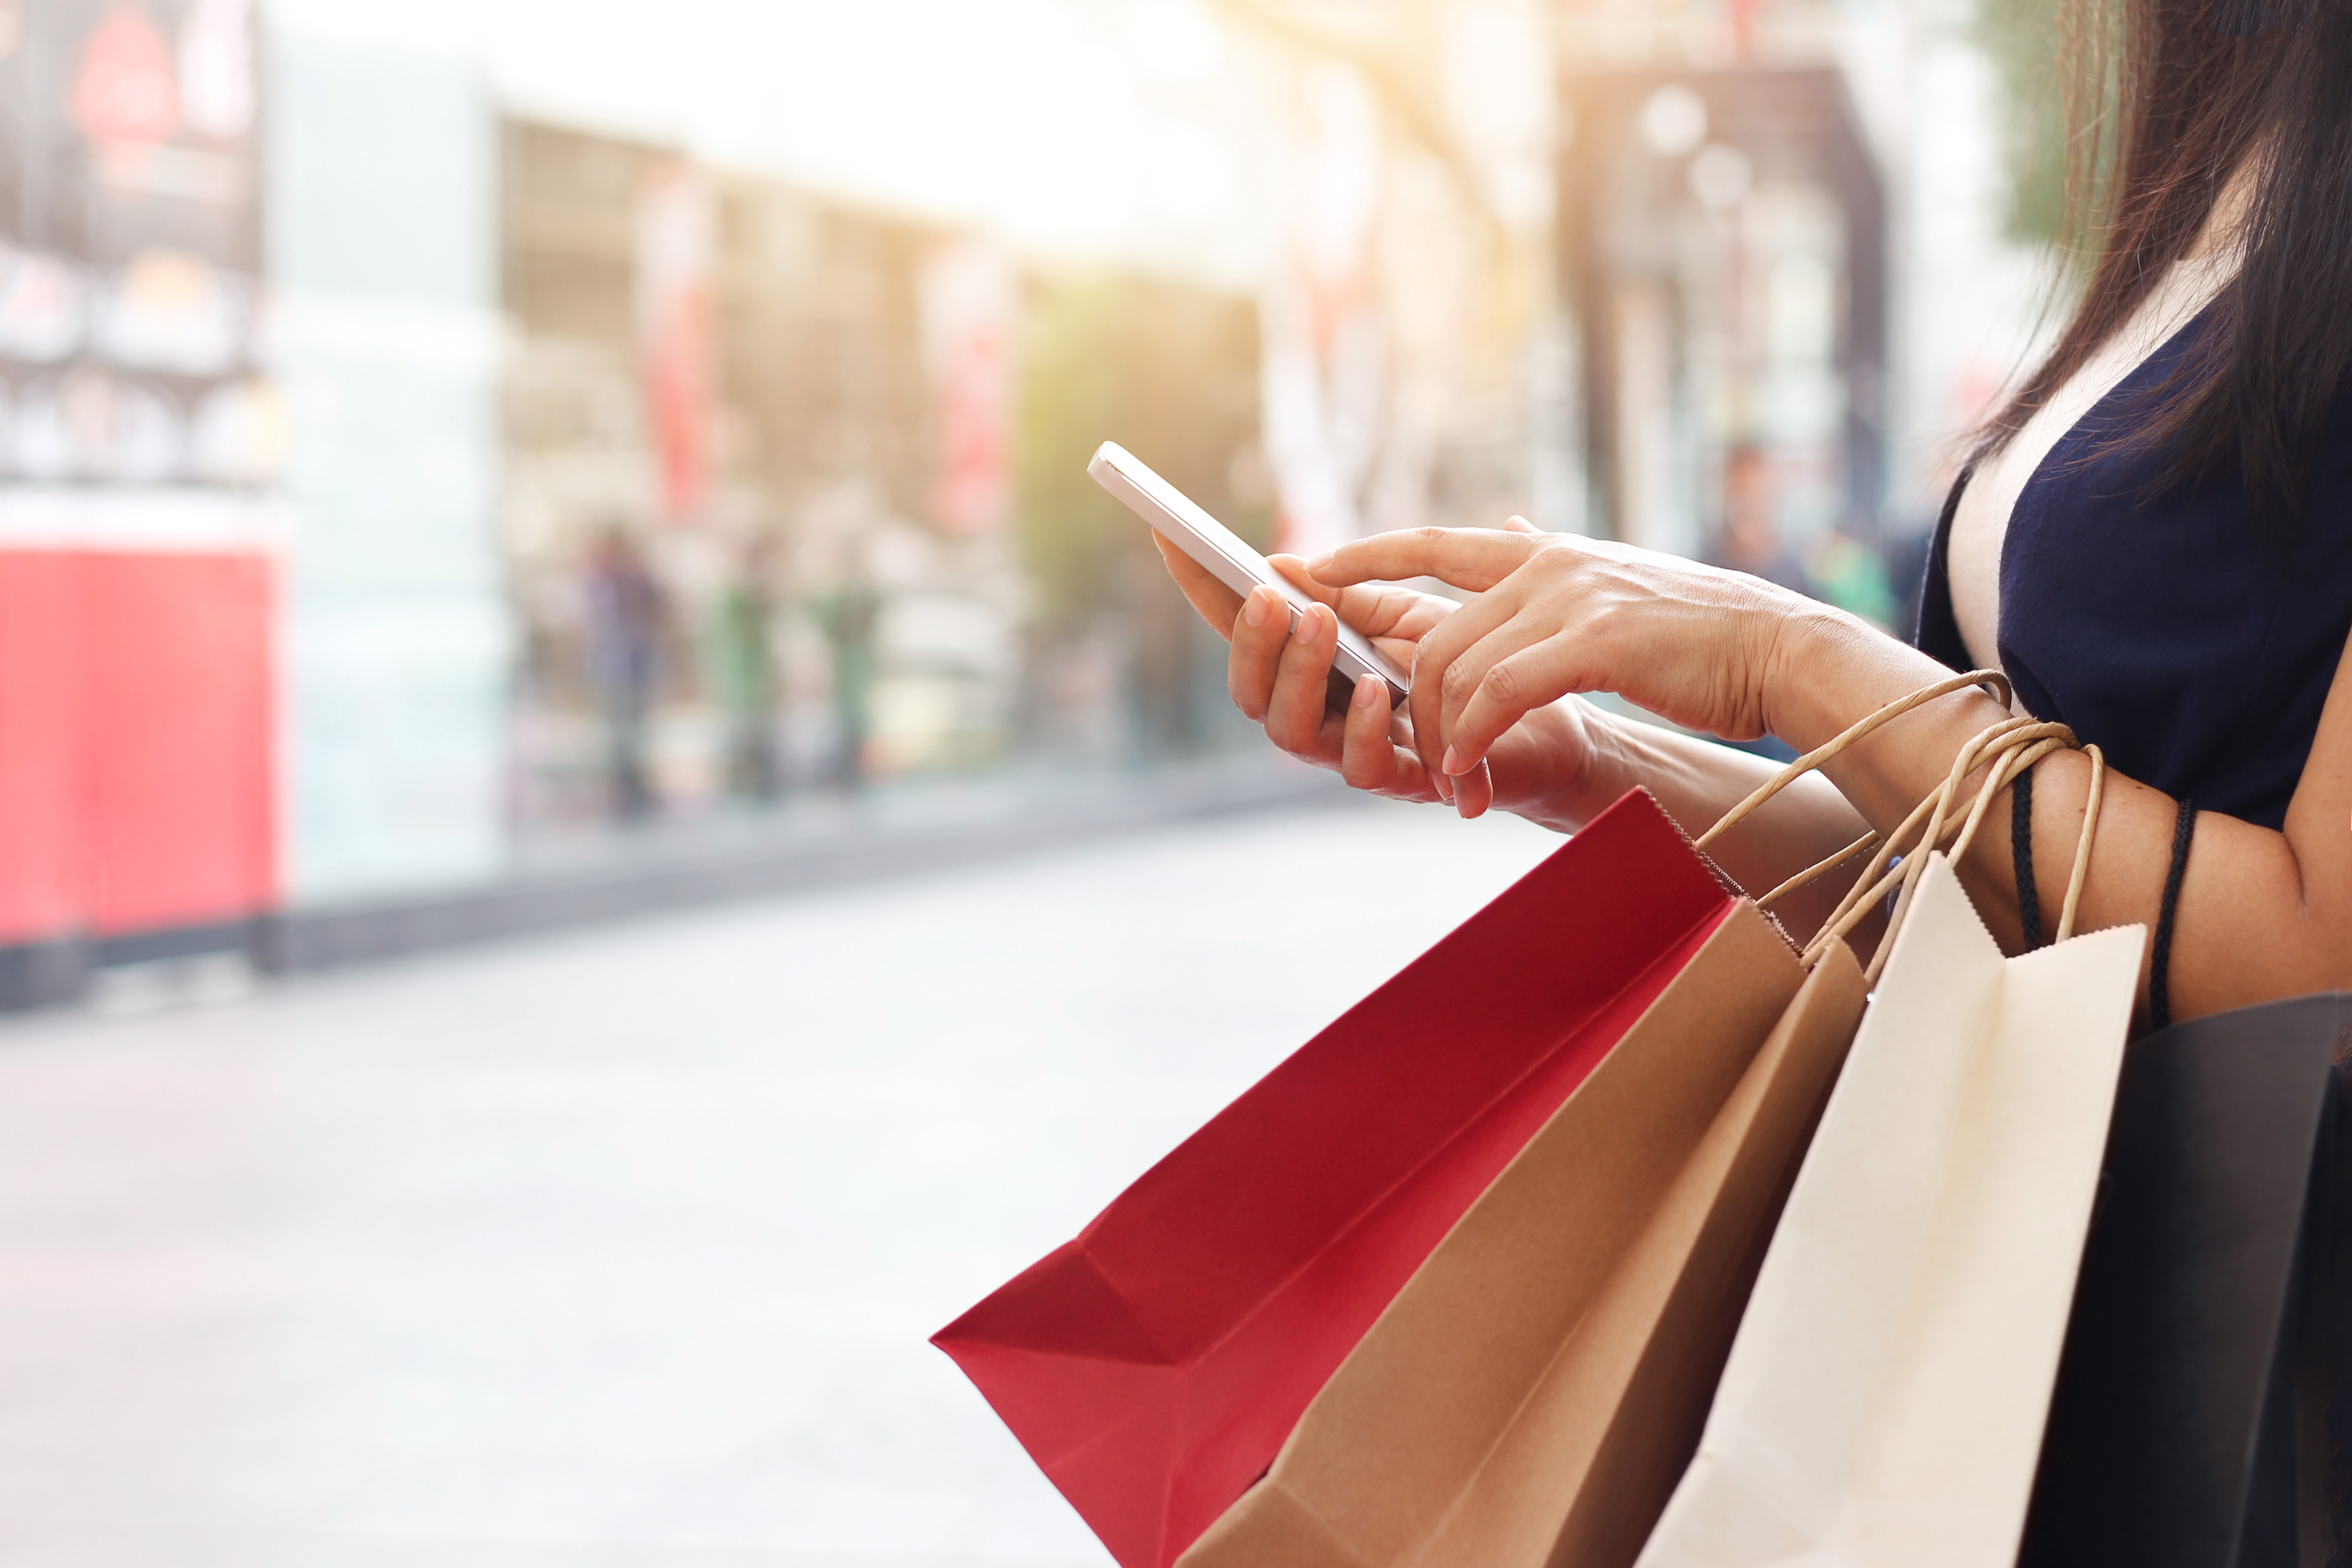 3-retail-marketing-insights-to-bridge-the-gap-between-online-and-in-store